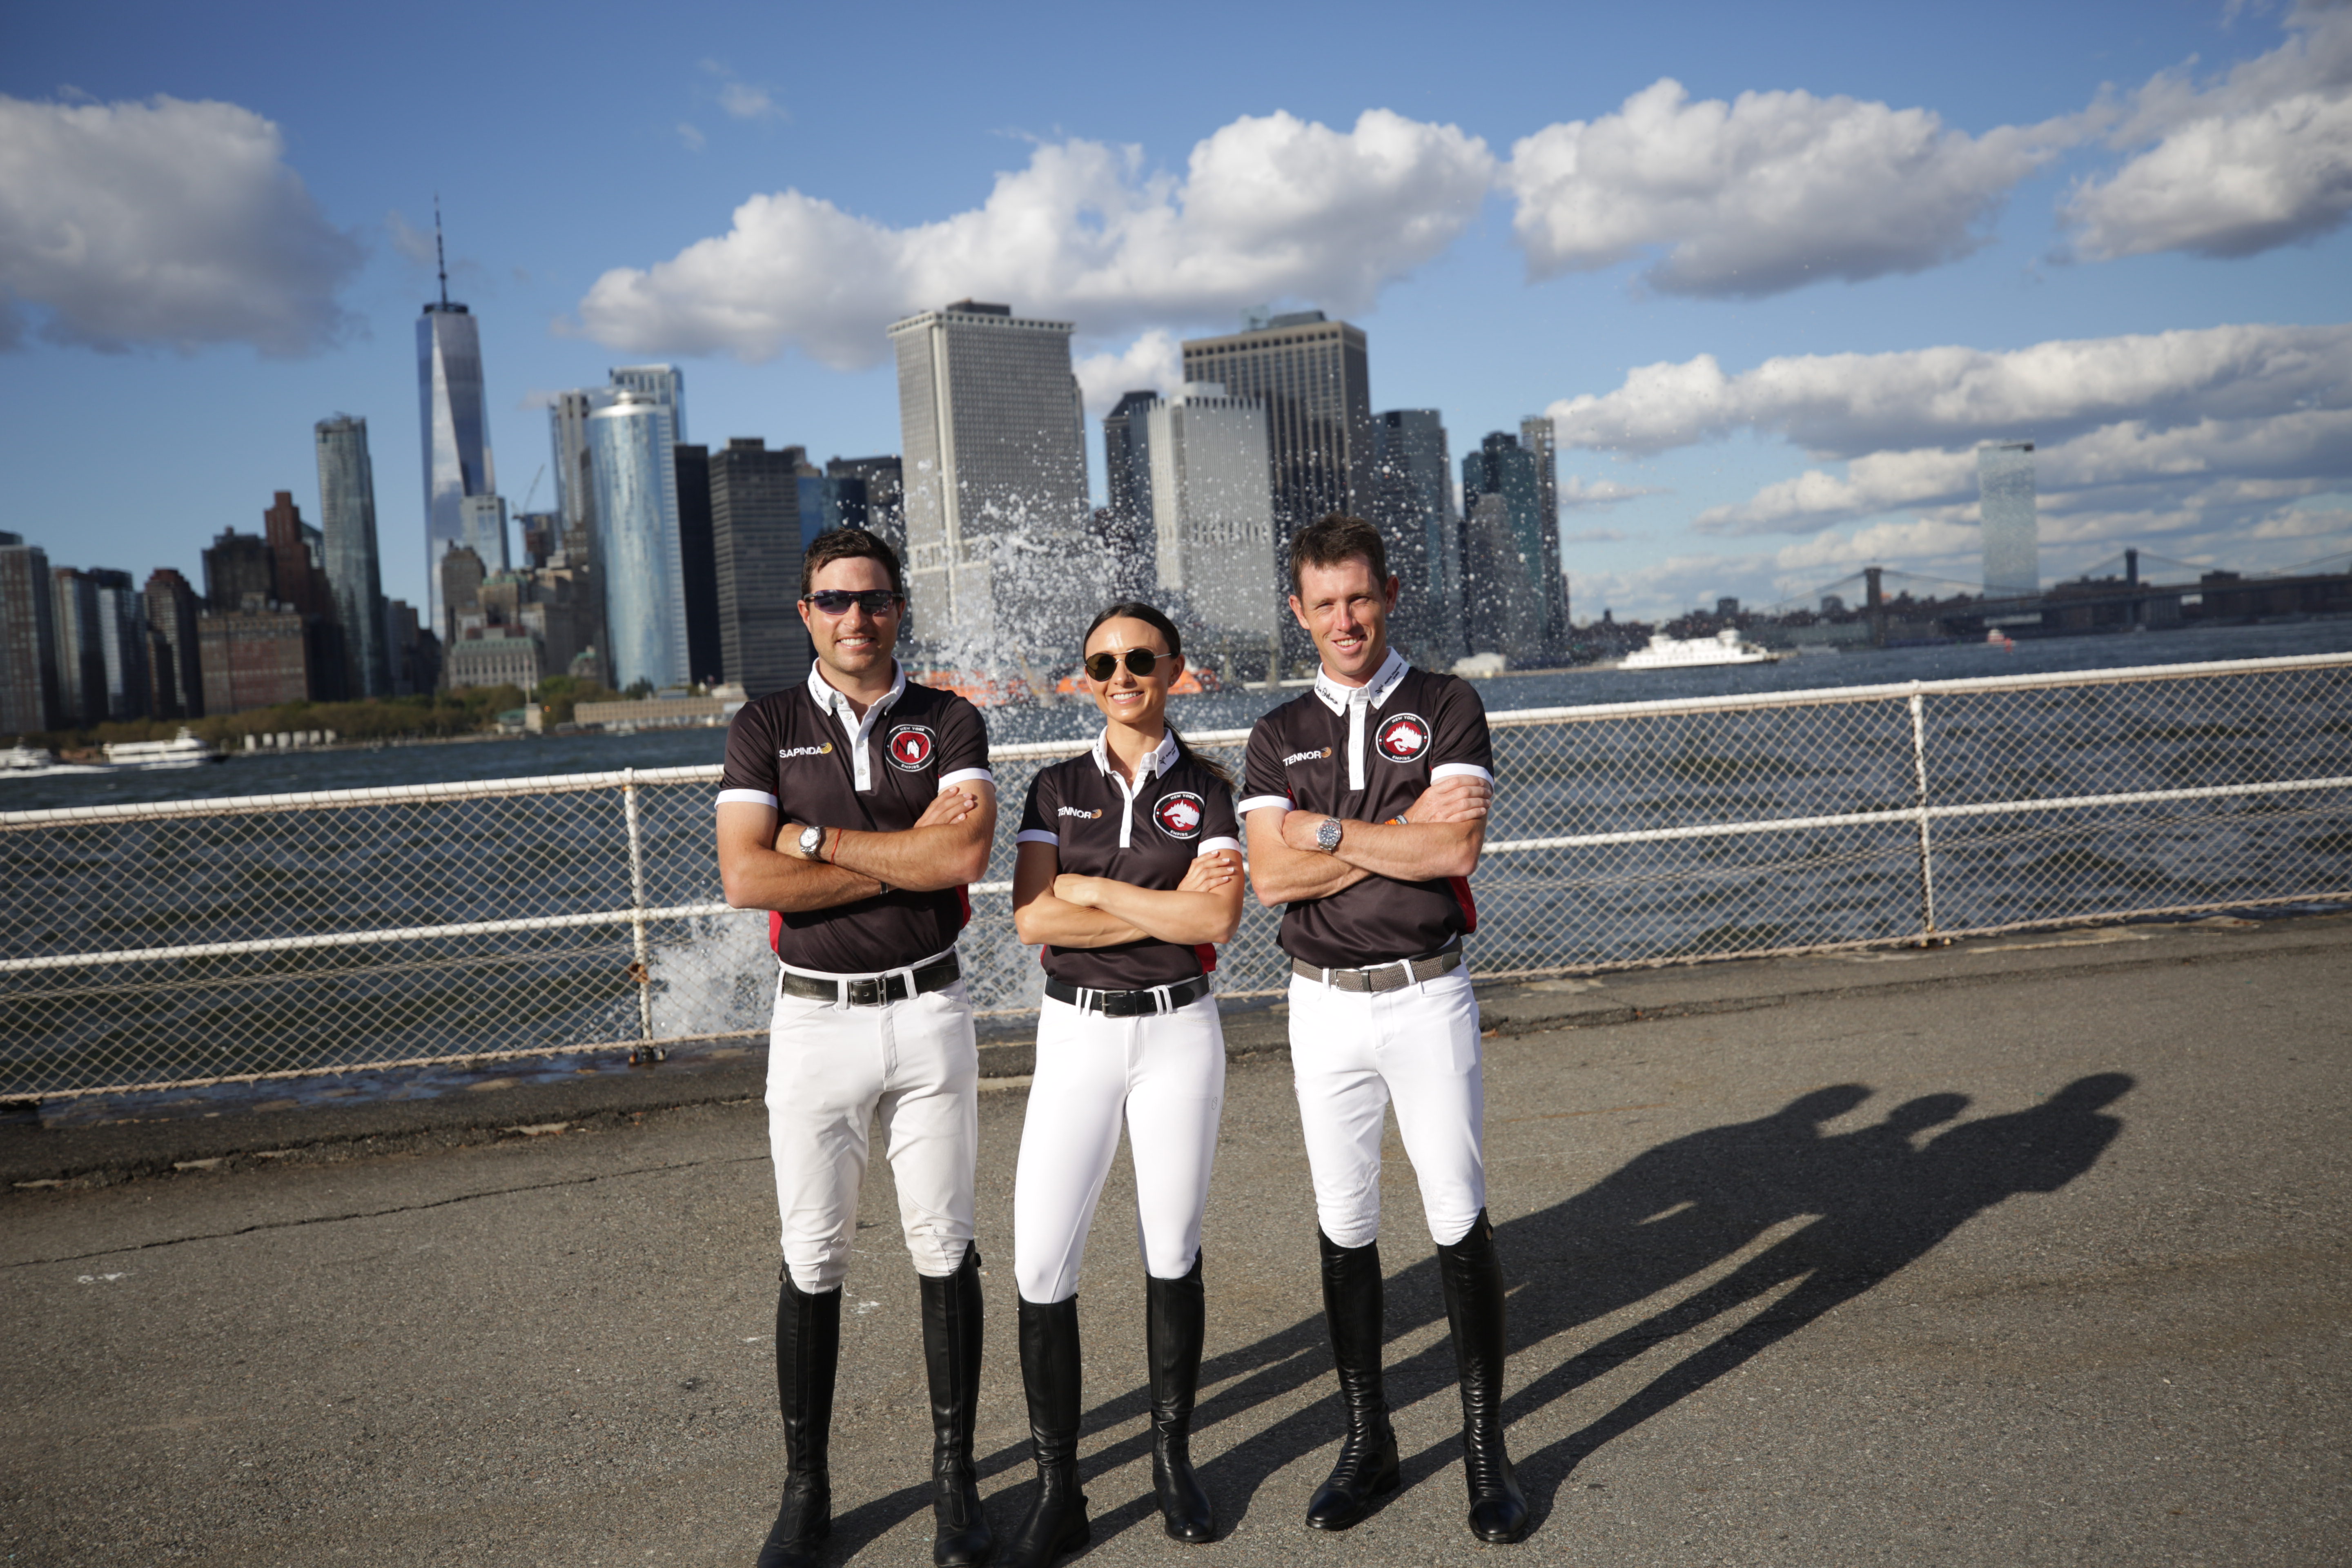 The New York Empire team for the Longines Global Champions Tour and Global Champions League in New York is Daniel Bluman, Georgina Bloomberg, and Scott Brash. Photo by Ashley Neuhof Photography